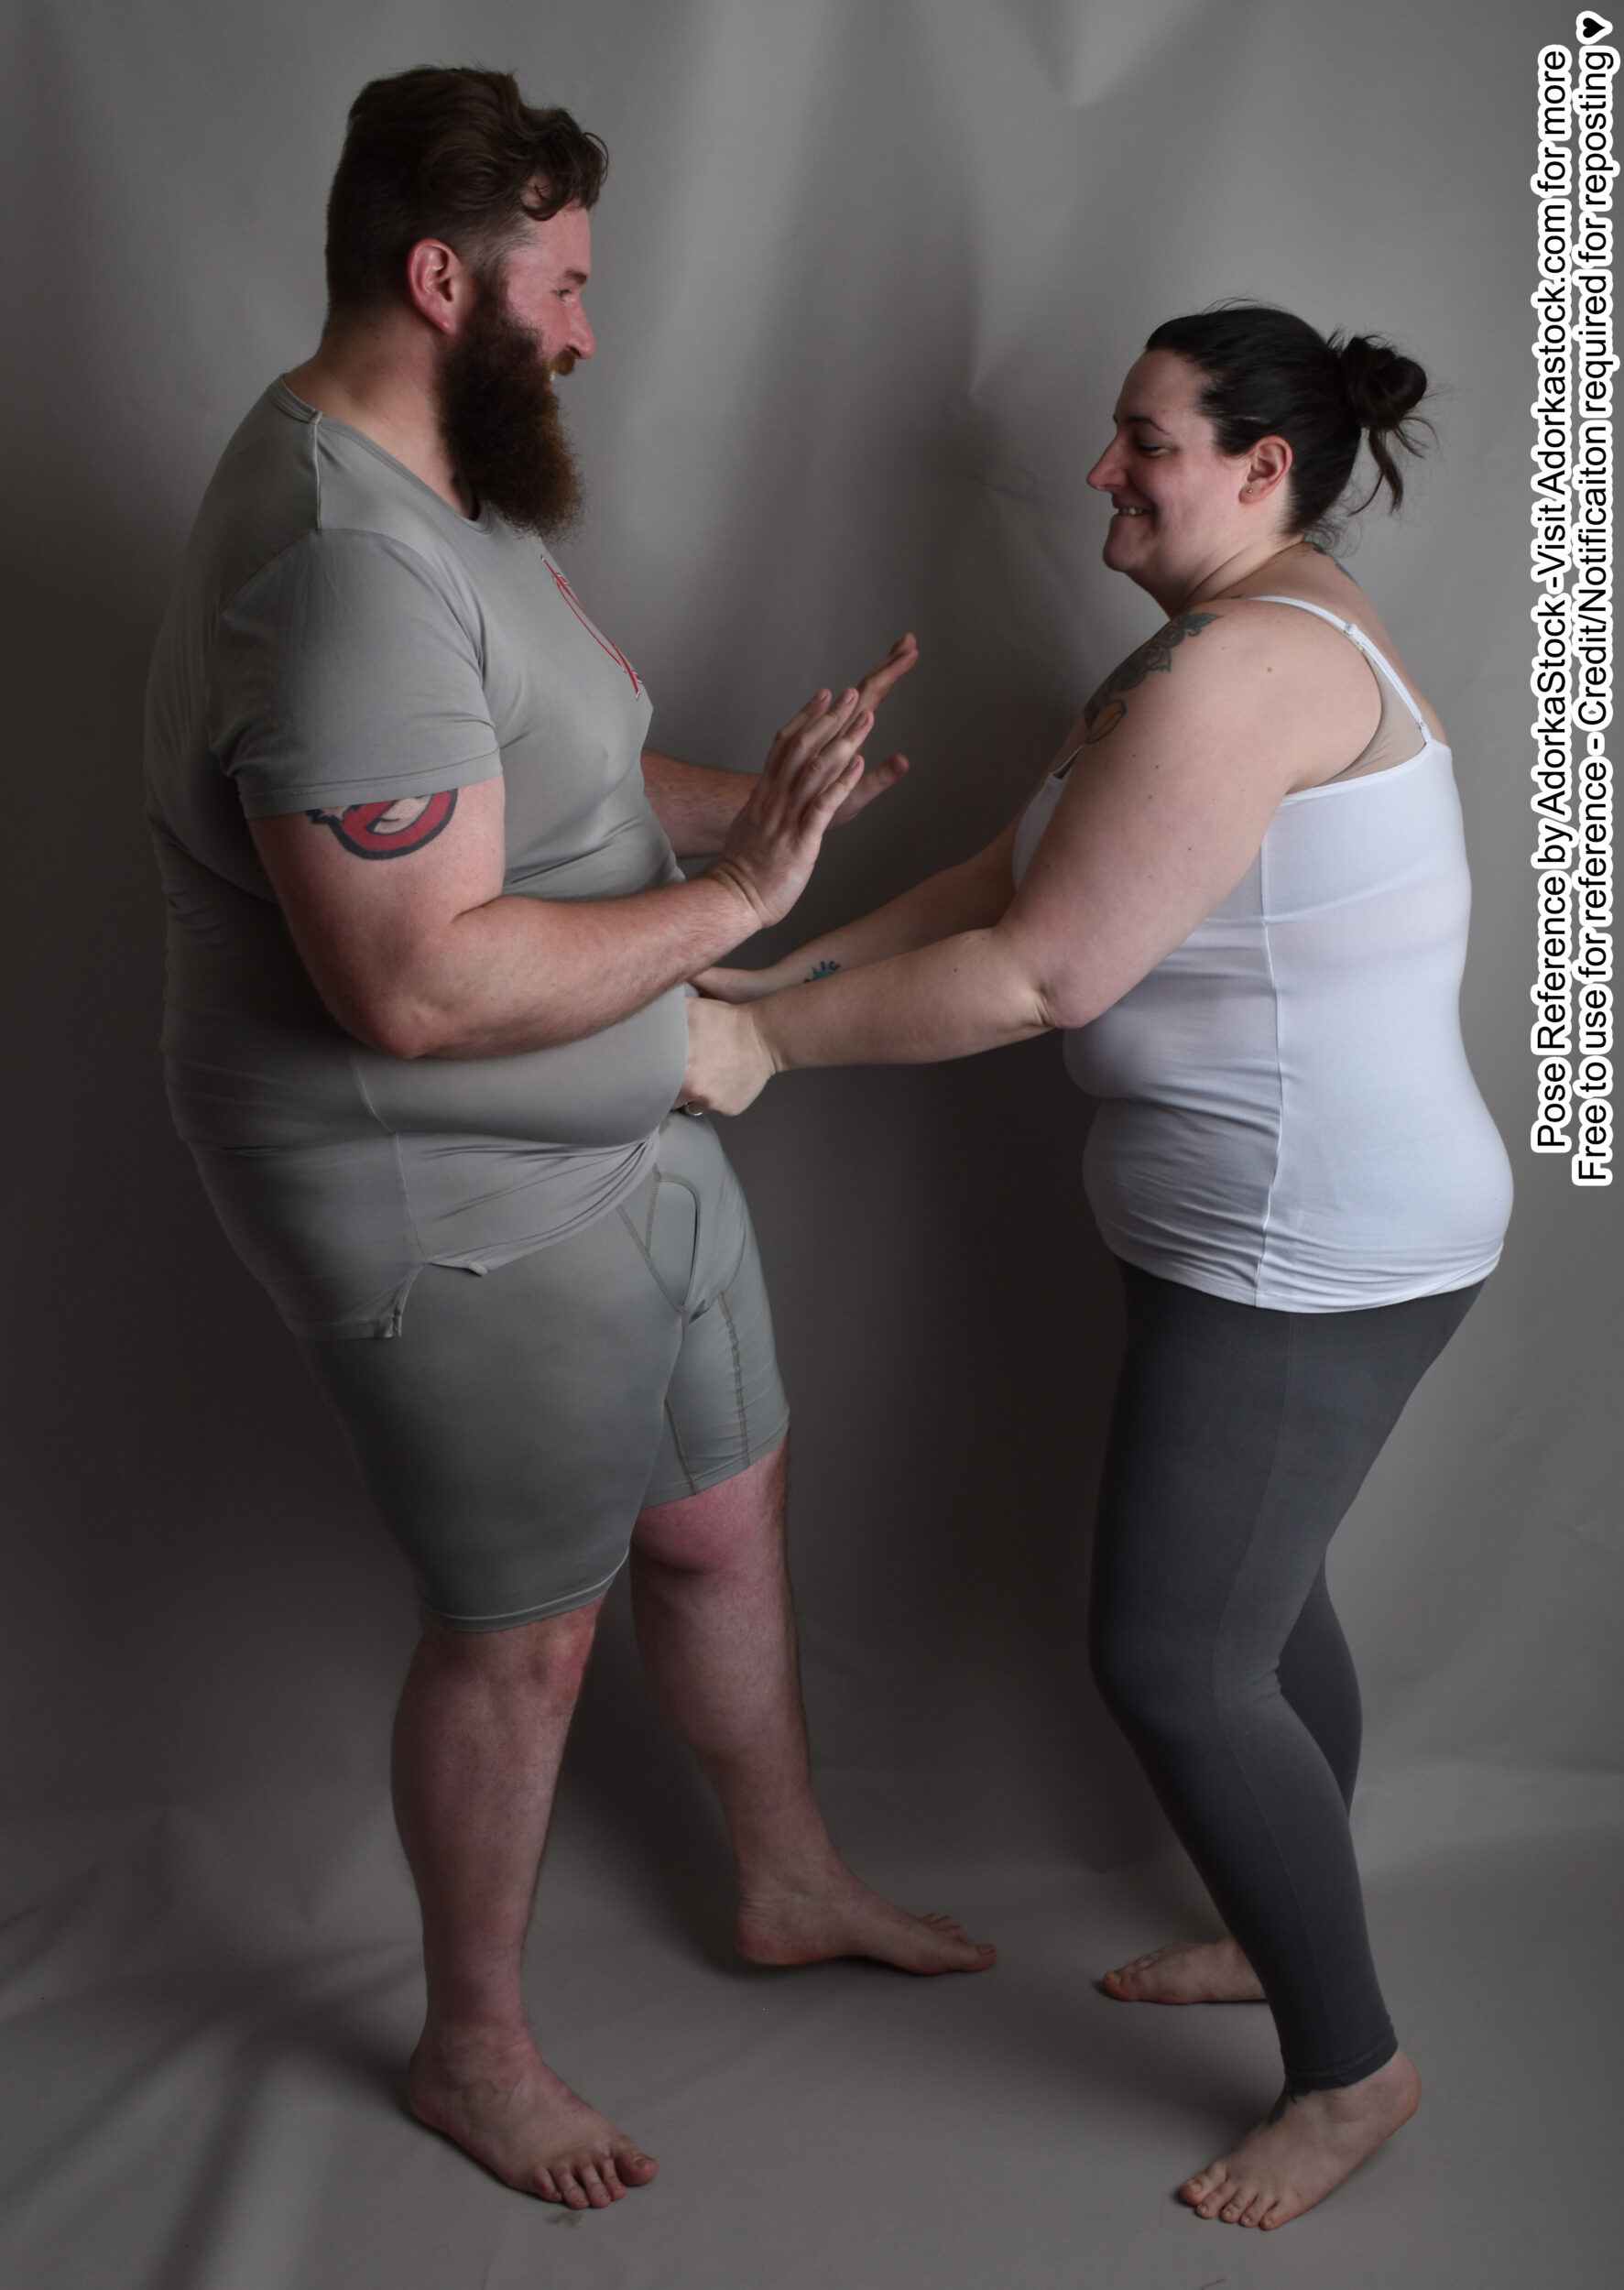 Fat, white, female pose reference model in standing pose with a fat, white male model, attacking him with tickles in the belly while he raises his arms in pleading.